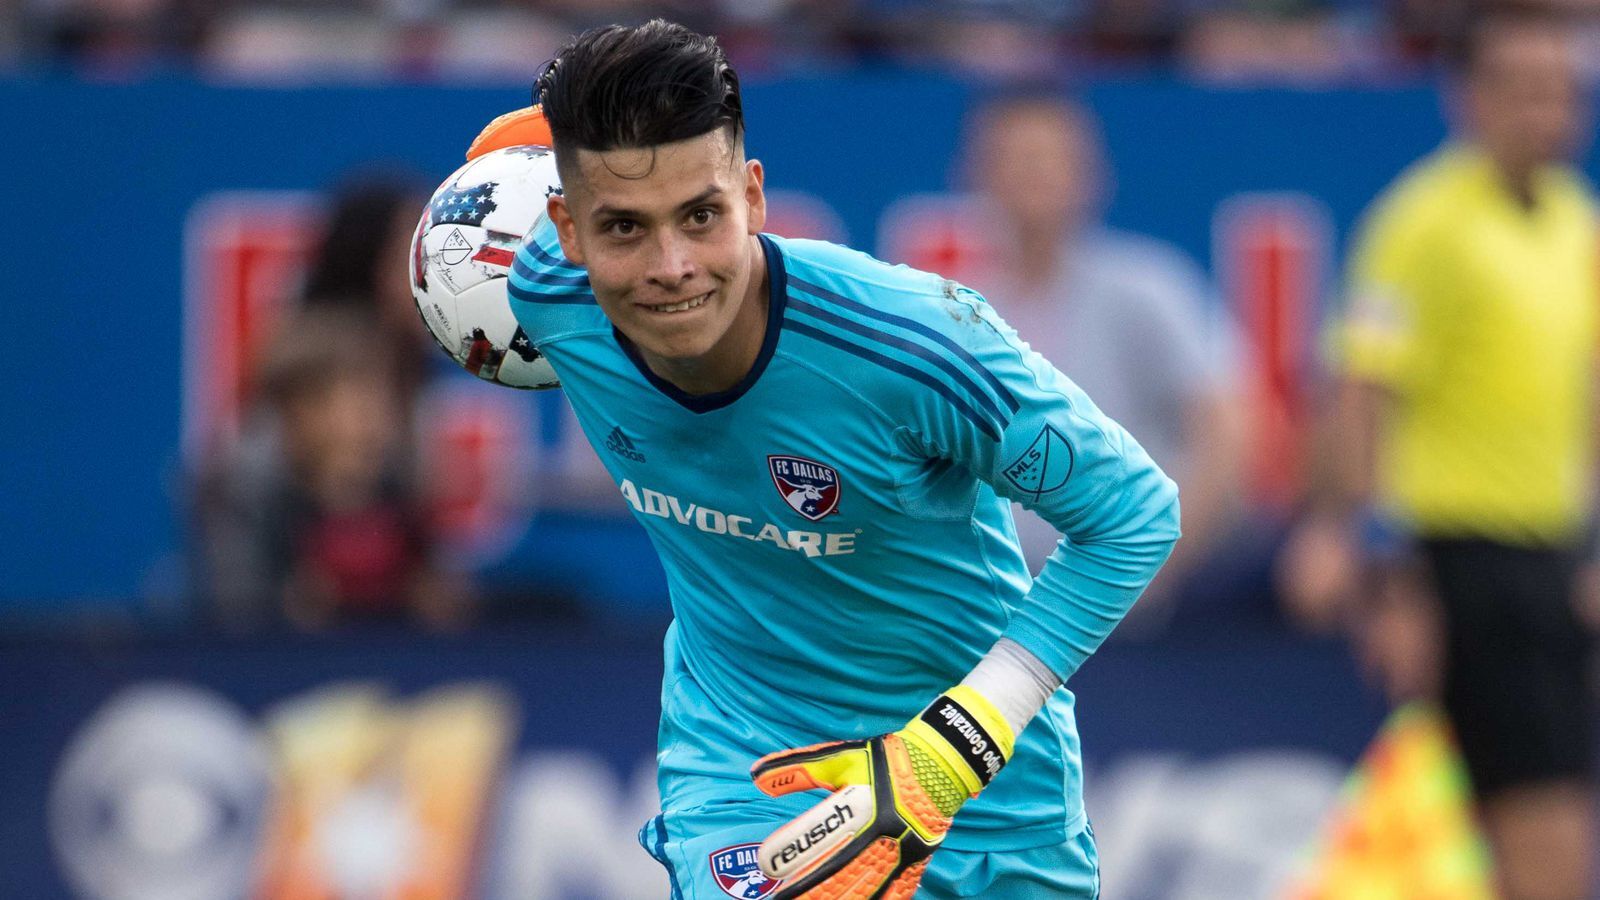 MLS Goalkeeper Gonzalez Suspended after News of Alleged Domestic Abuse